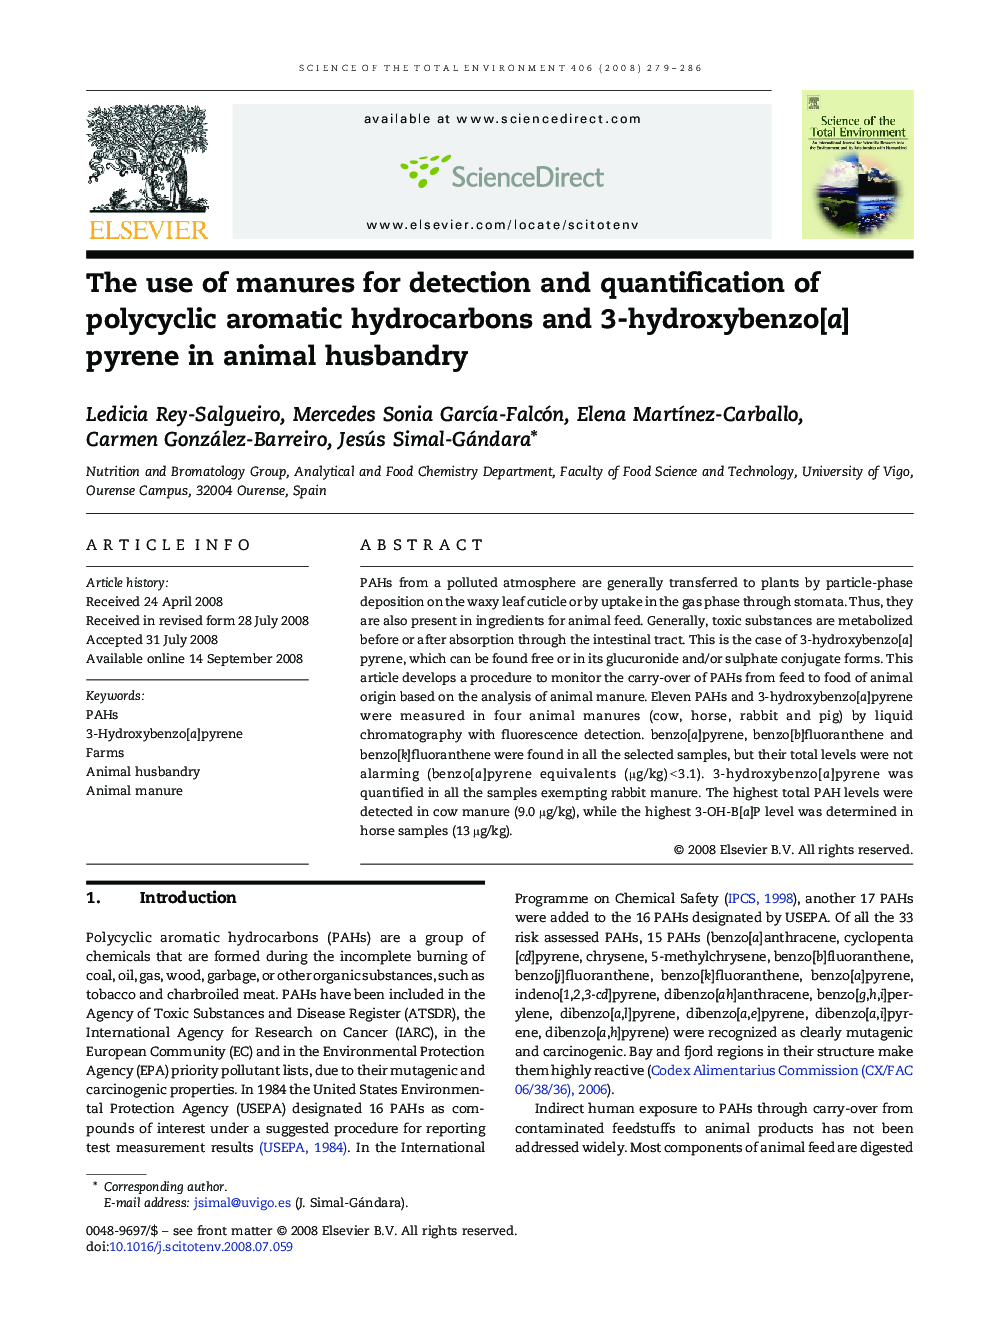 The use of manures for detection and quantification of polycyclic aromatic hydrocarbons and 3-hydroxybenzo[a]pyrene in animal husbandry